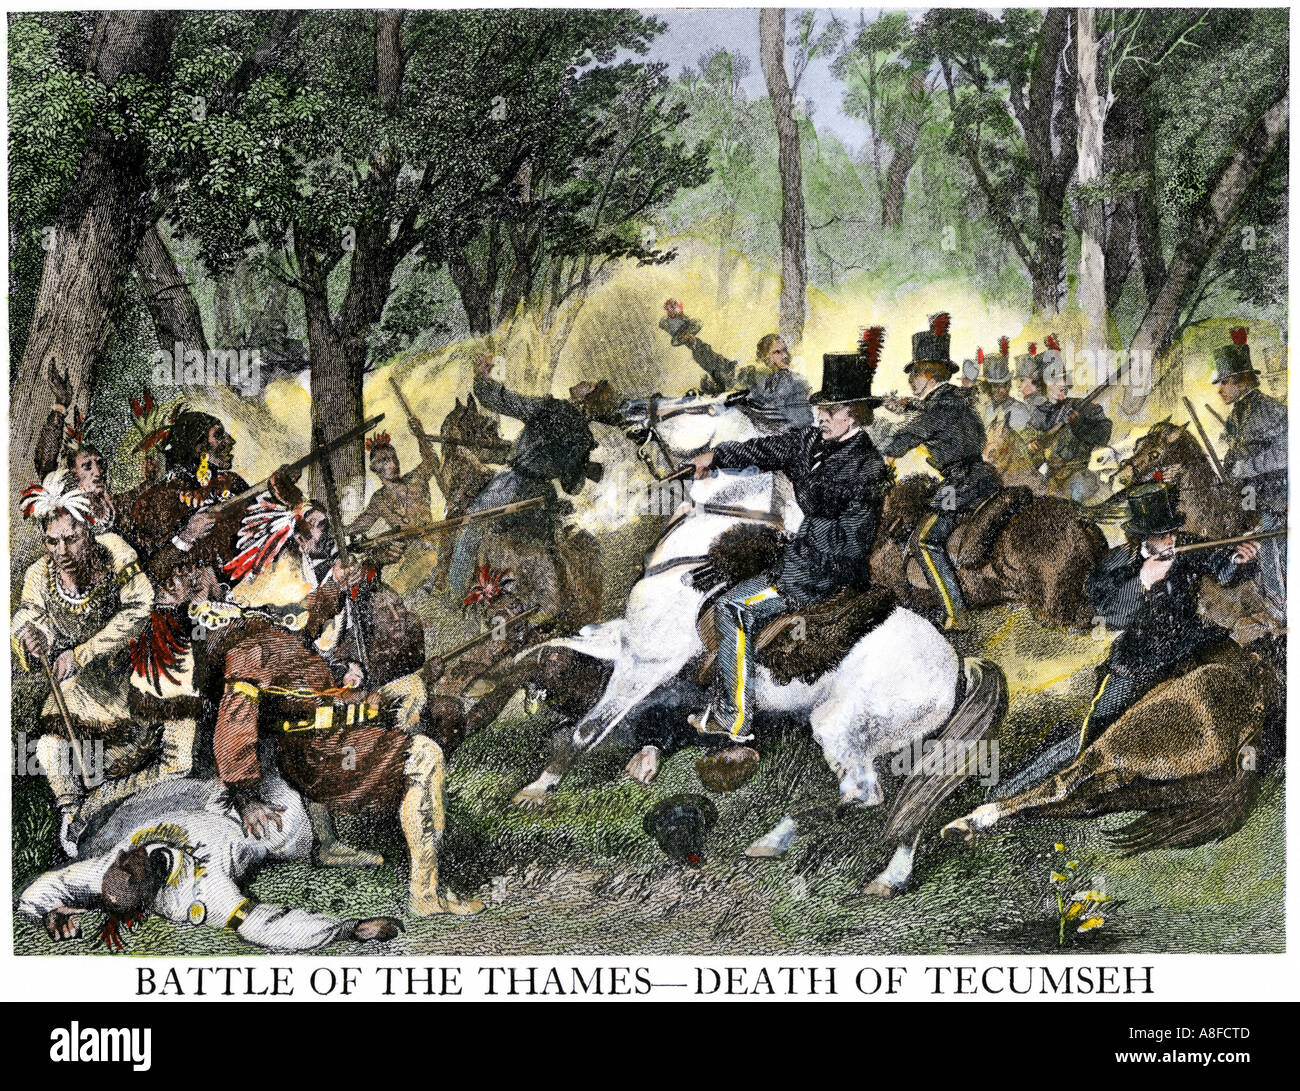 Chief Tecumseh killed by US troops under William Henry Harrison at the Battle of the Thames 1813. Hand-colored halftone of an illustration Stock Photo